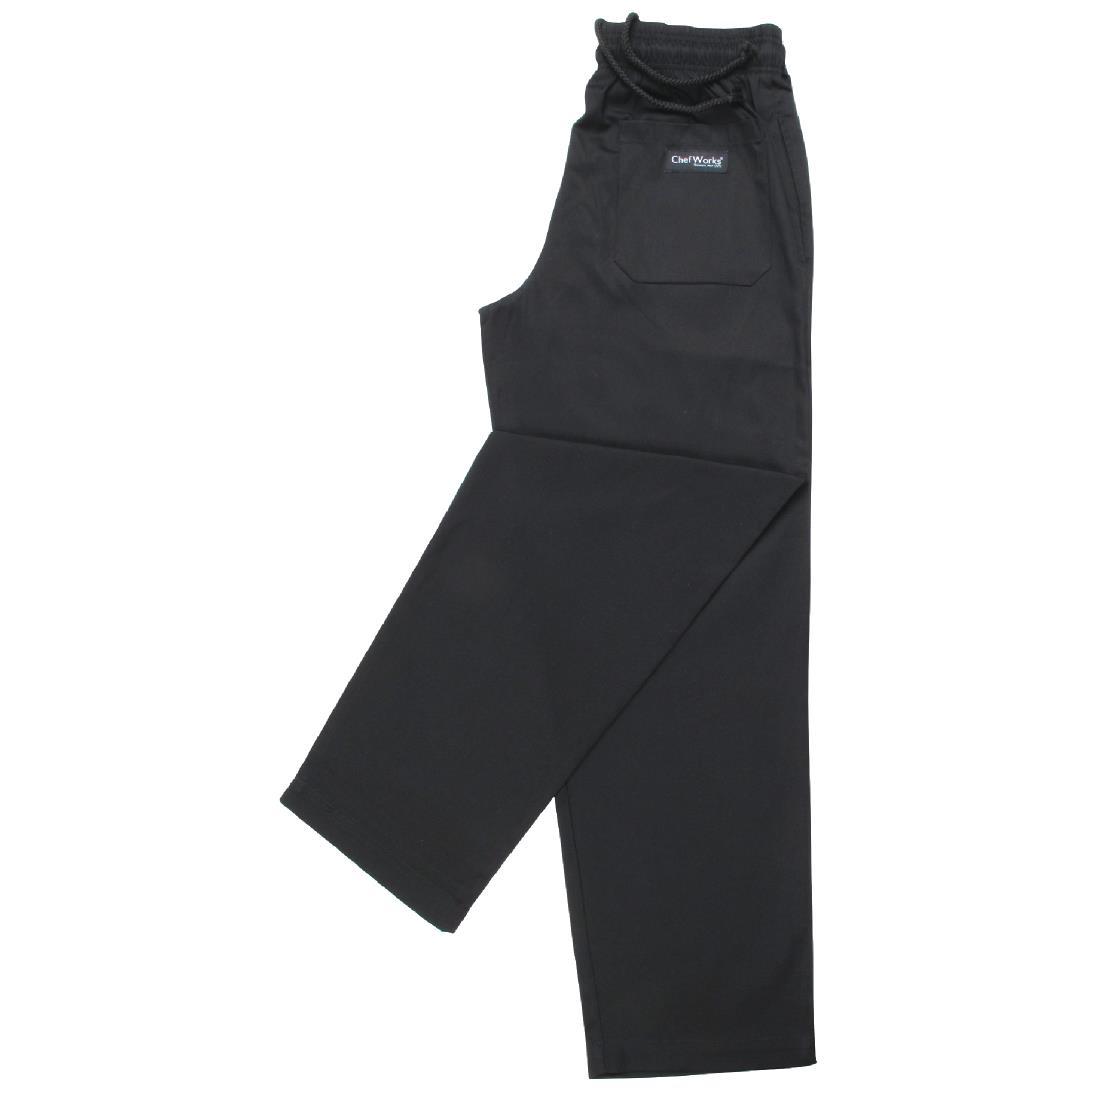 Chef Works Essential Baggy Trousers Black 3XL - A029-3XL  - 2